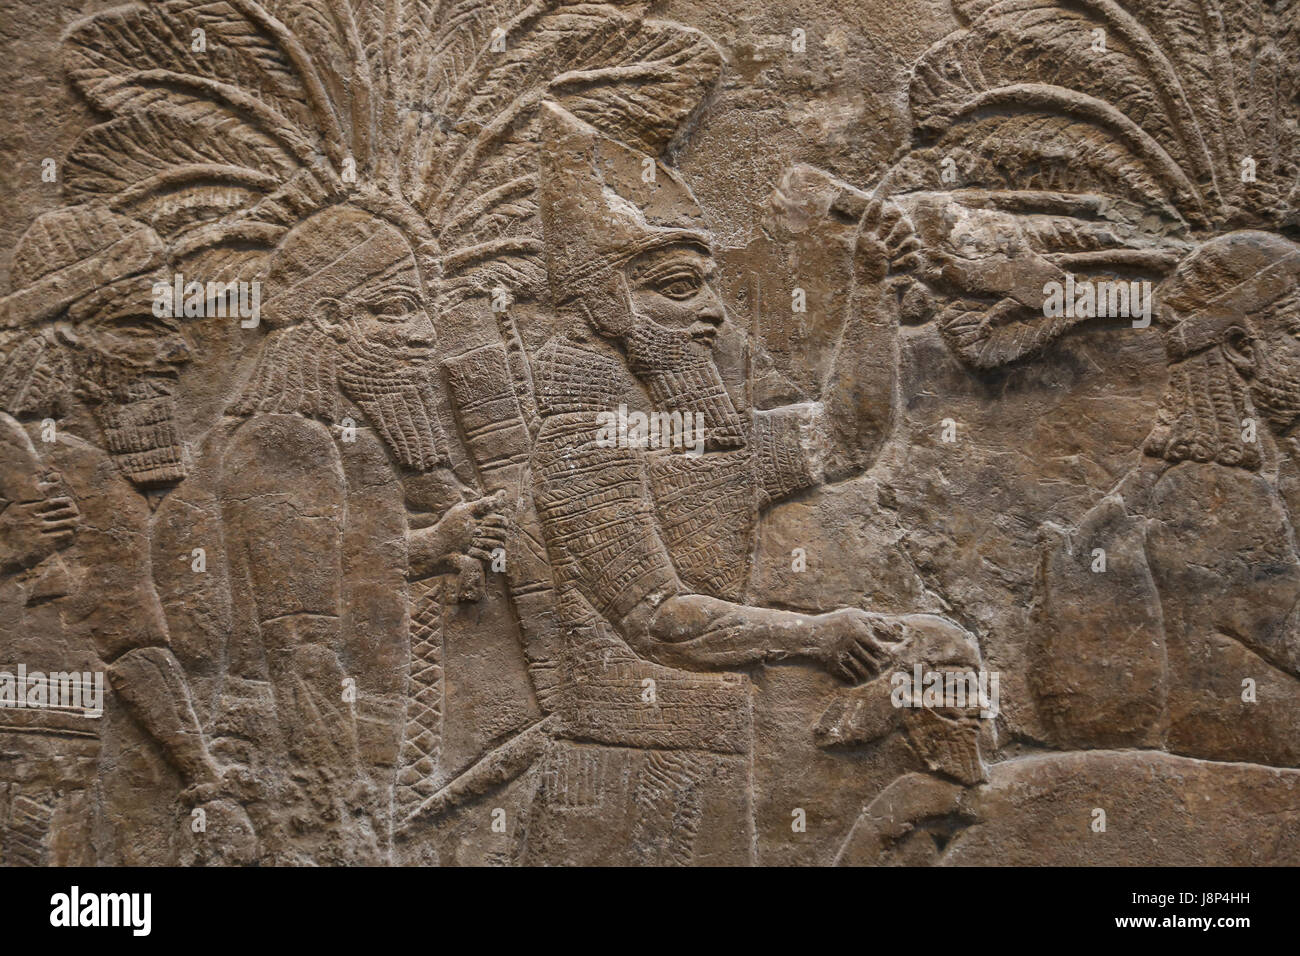 Campaigning in southern Iraq.  Heads of prisoners. Assyrian, 640-620 BC. Nineveh, South-West Palace. Iraq. British Museum. London. Stock Photo